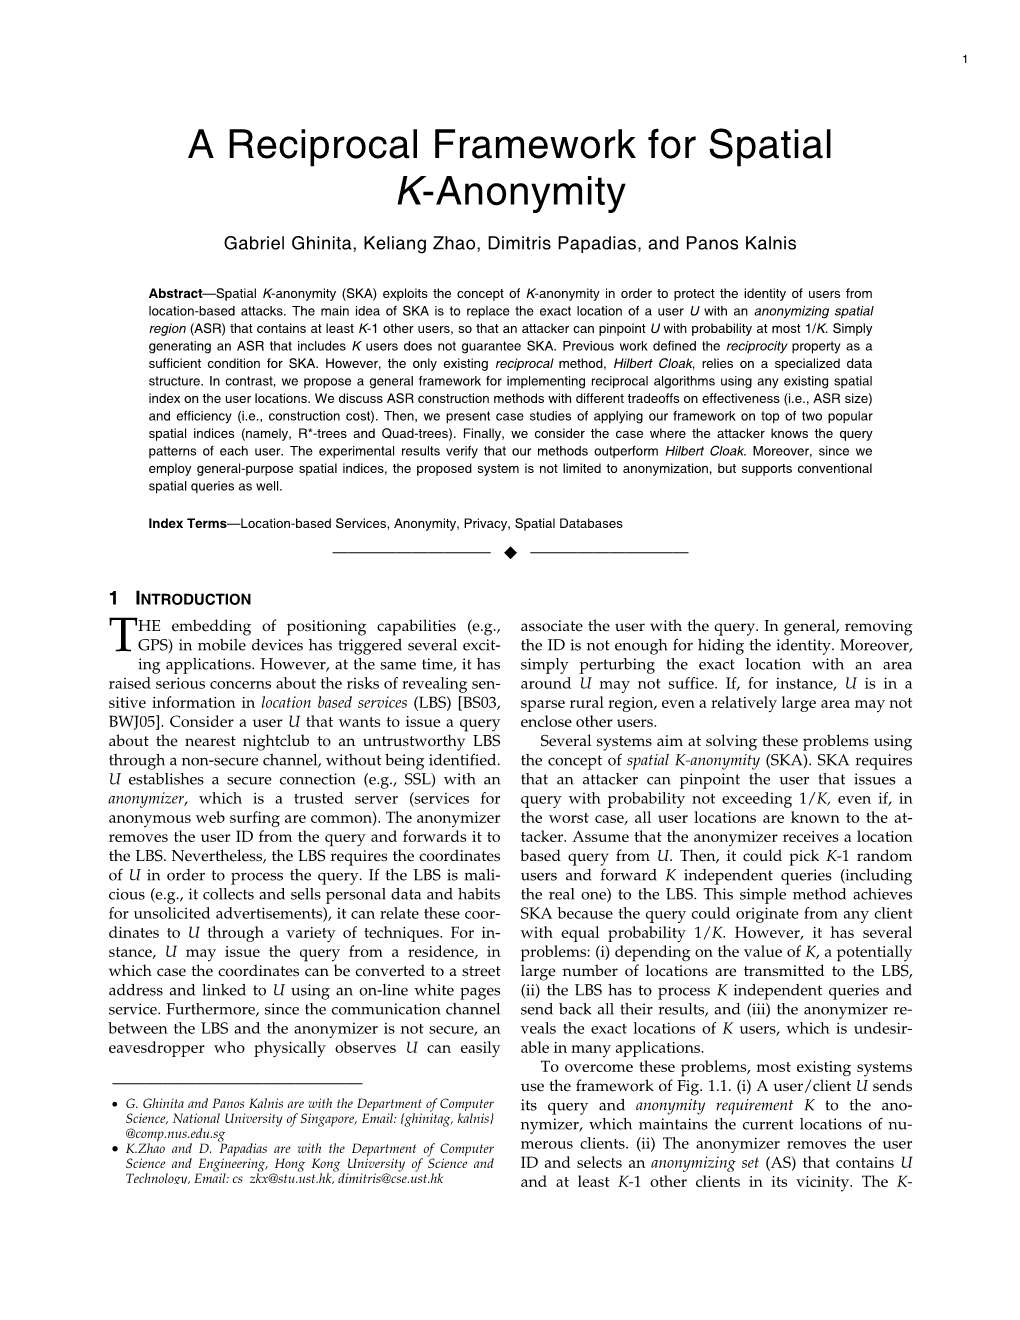 A Reciprocal Framework for Spatial K-Anonymity